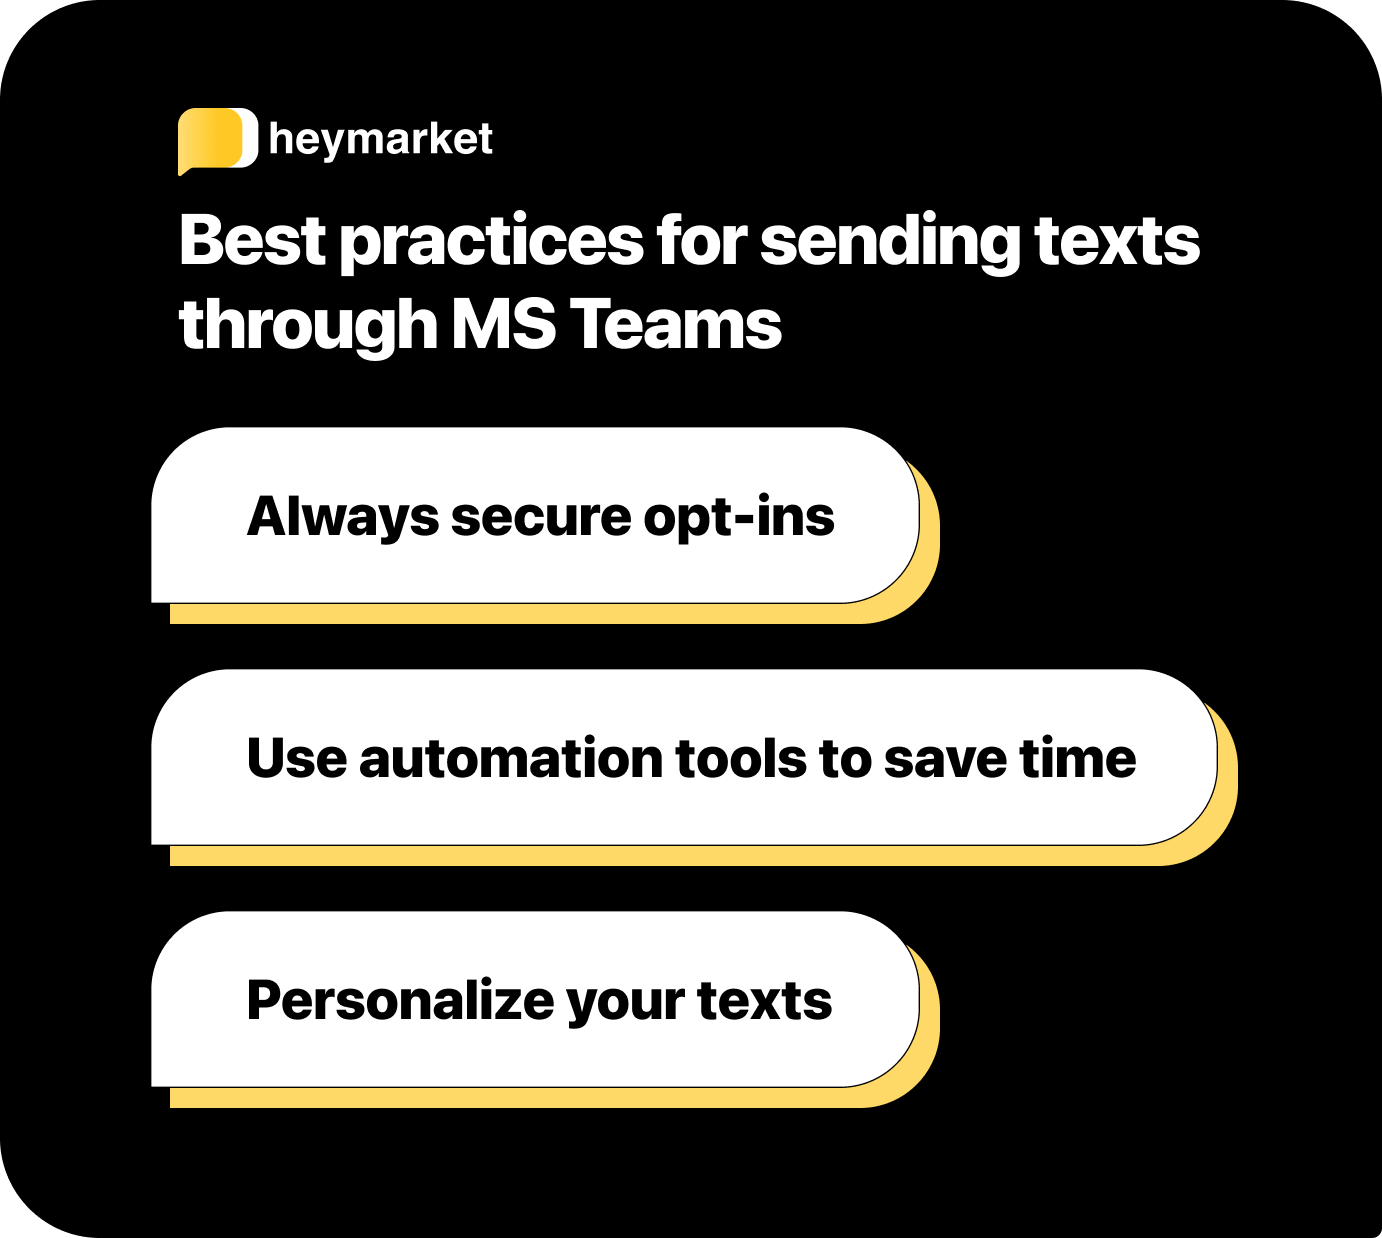 Best practices for sending texts through MS Teams: Always secure opt-ins, use automation tools to save time, and personalize your texts.